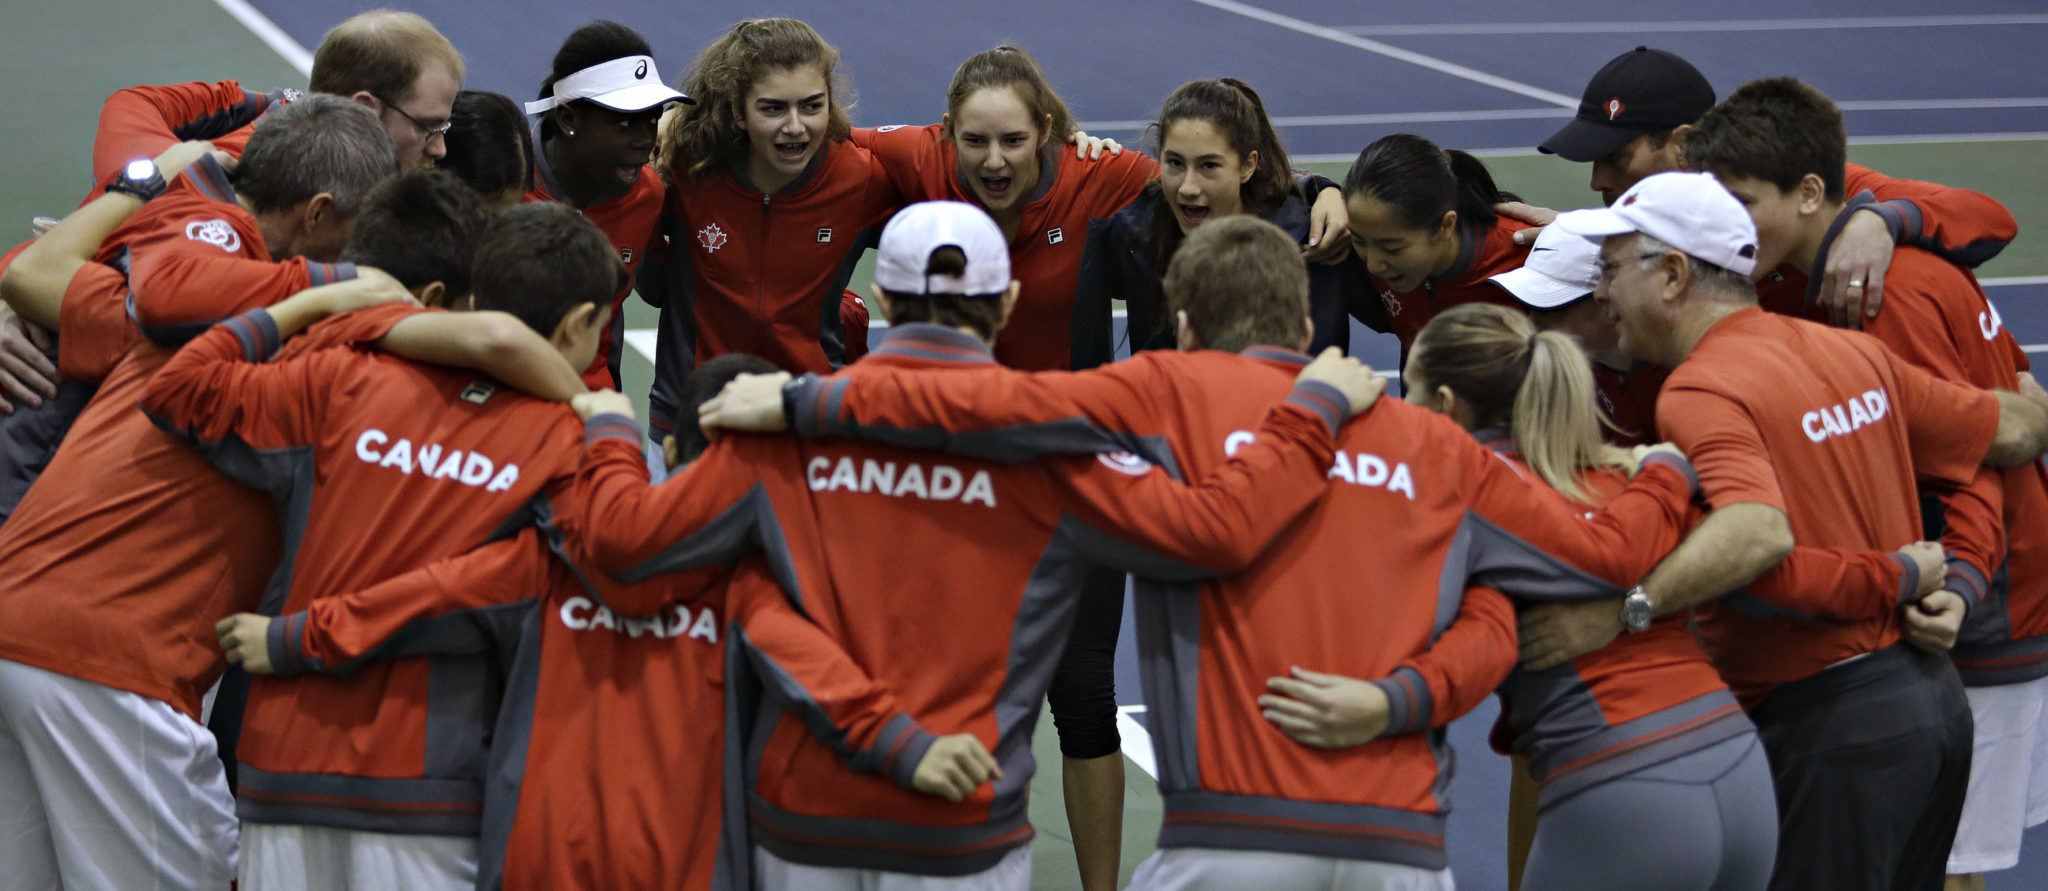 Canada qualifies for the Finals Tennis Canada